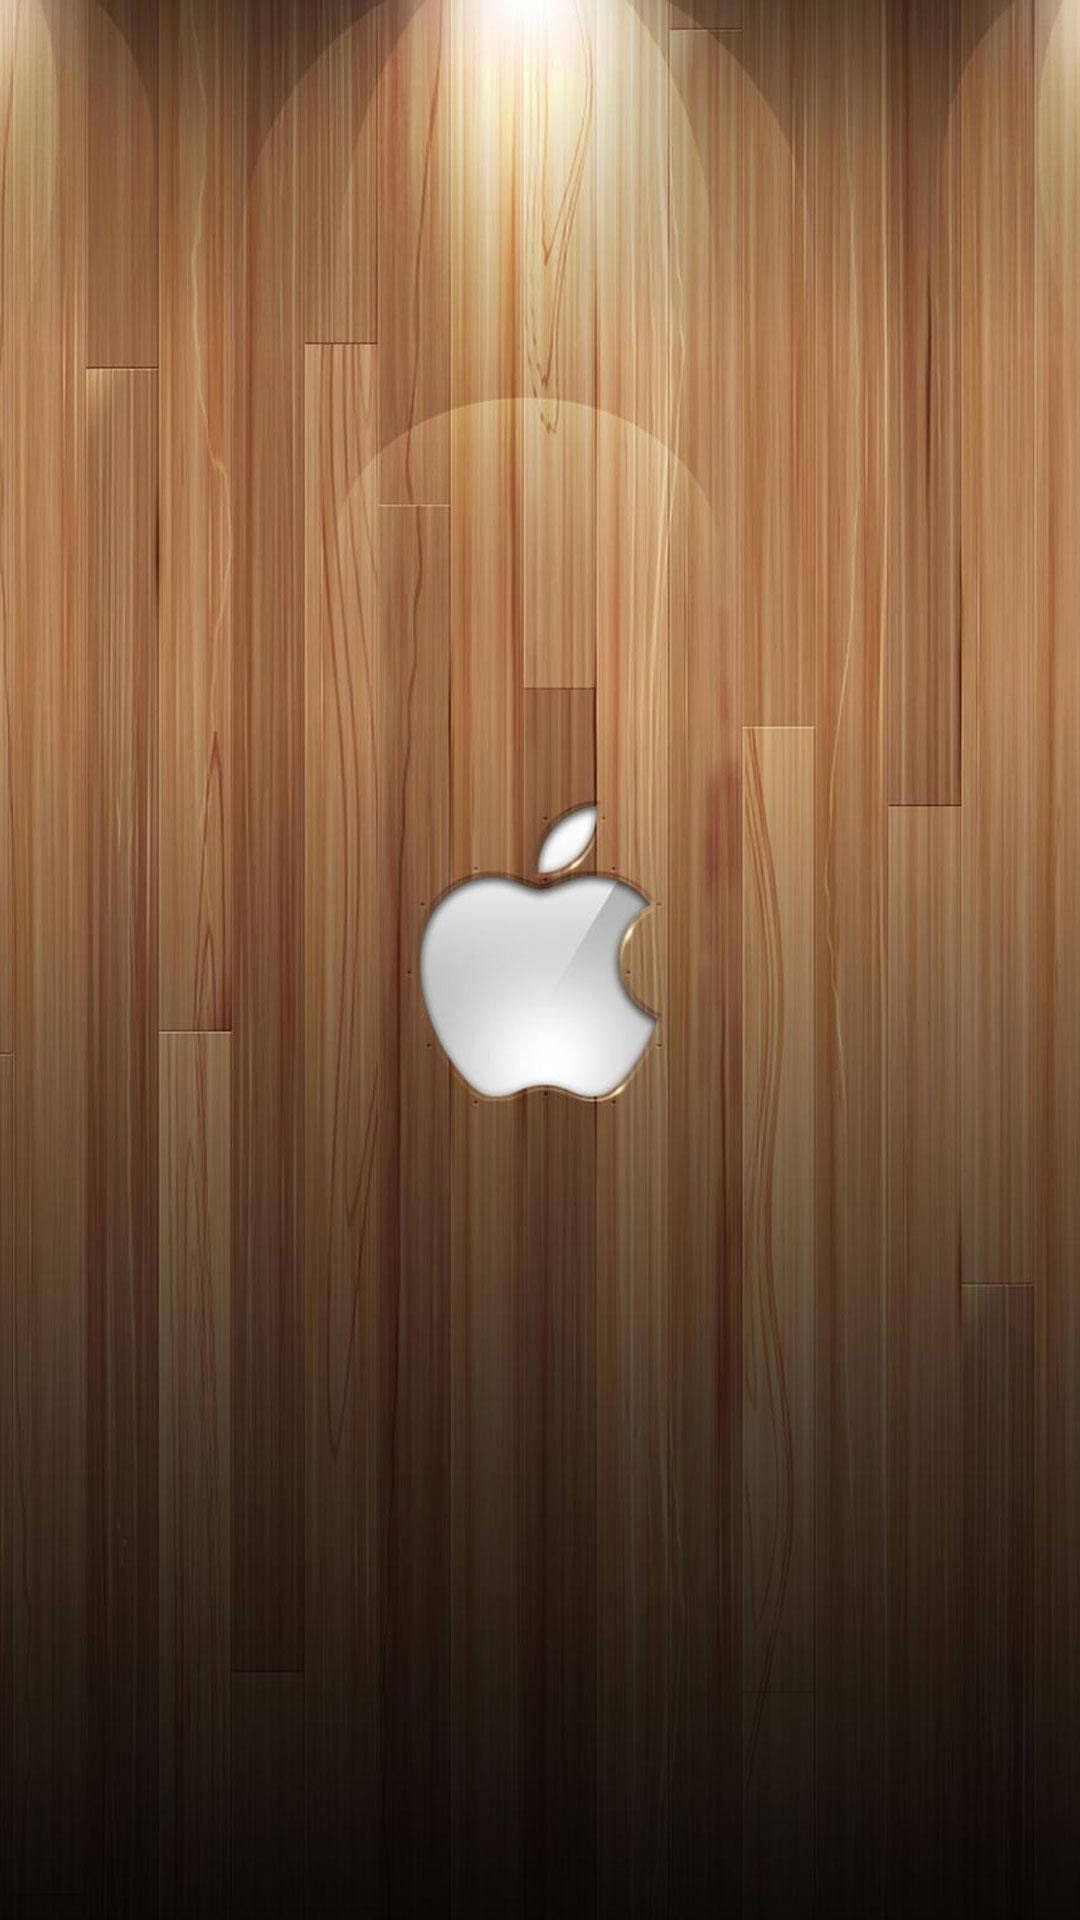 Silver Apple Logo Iphone 6s Plus Background